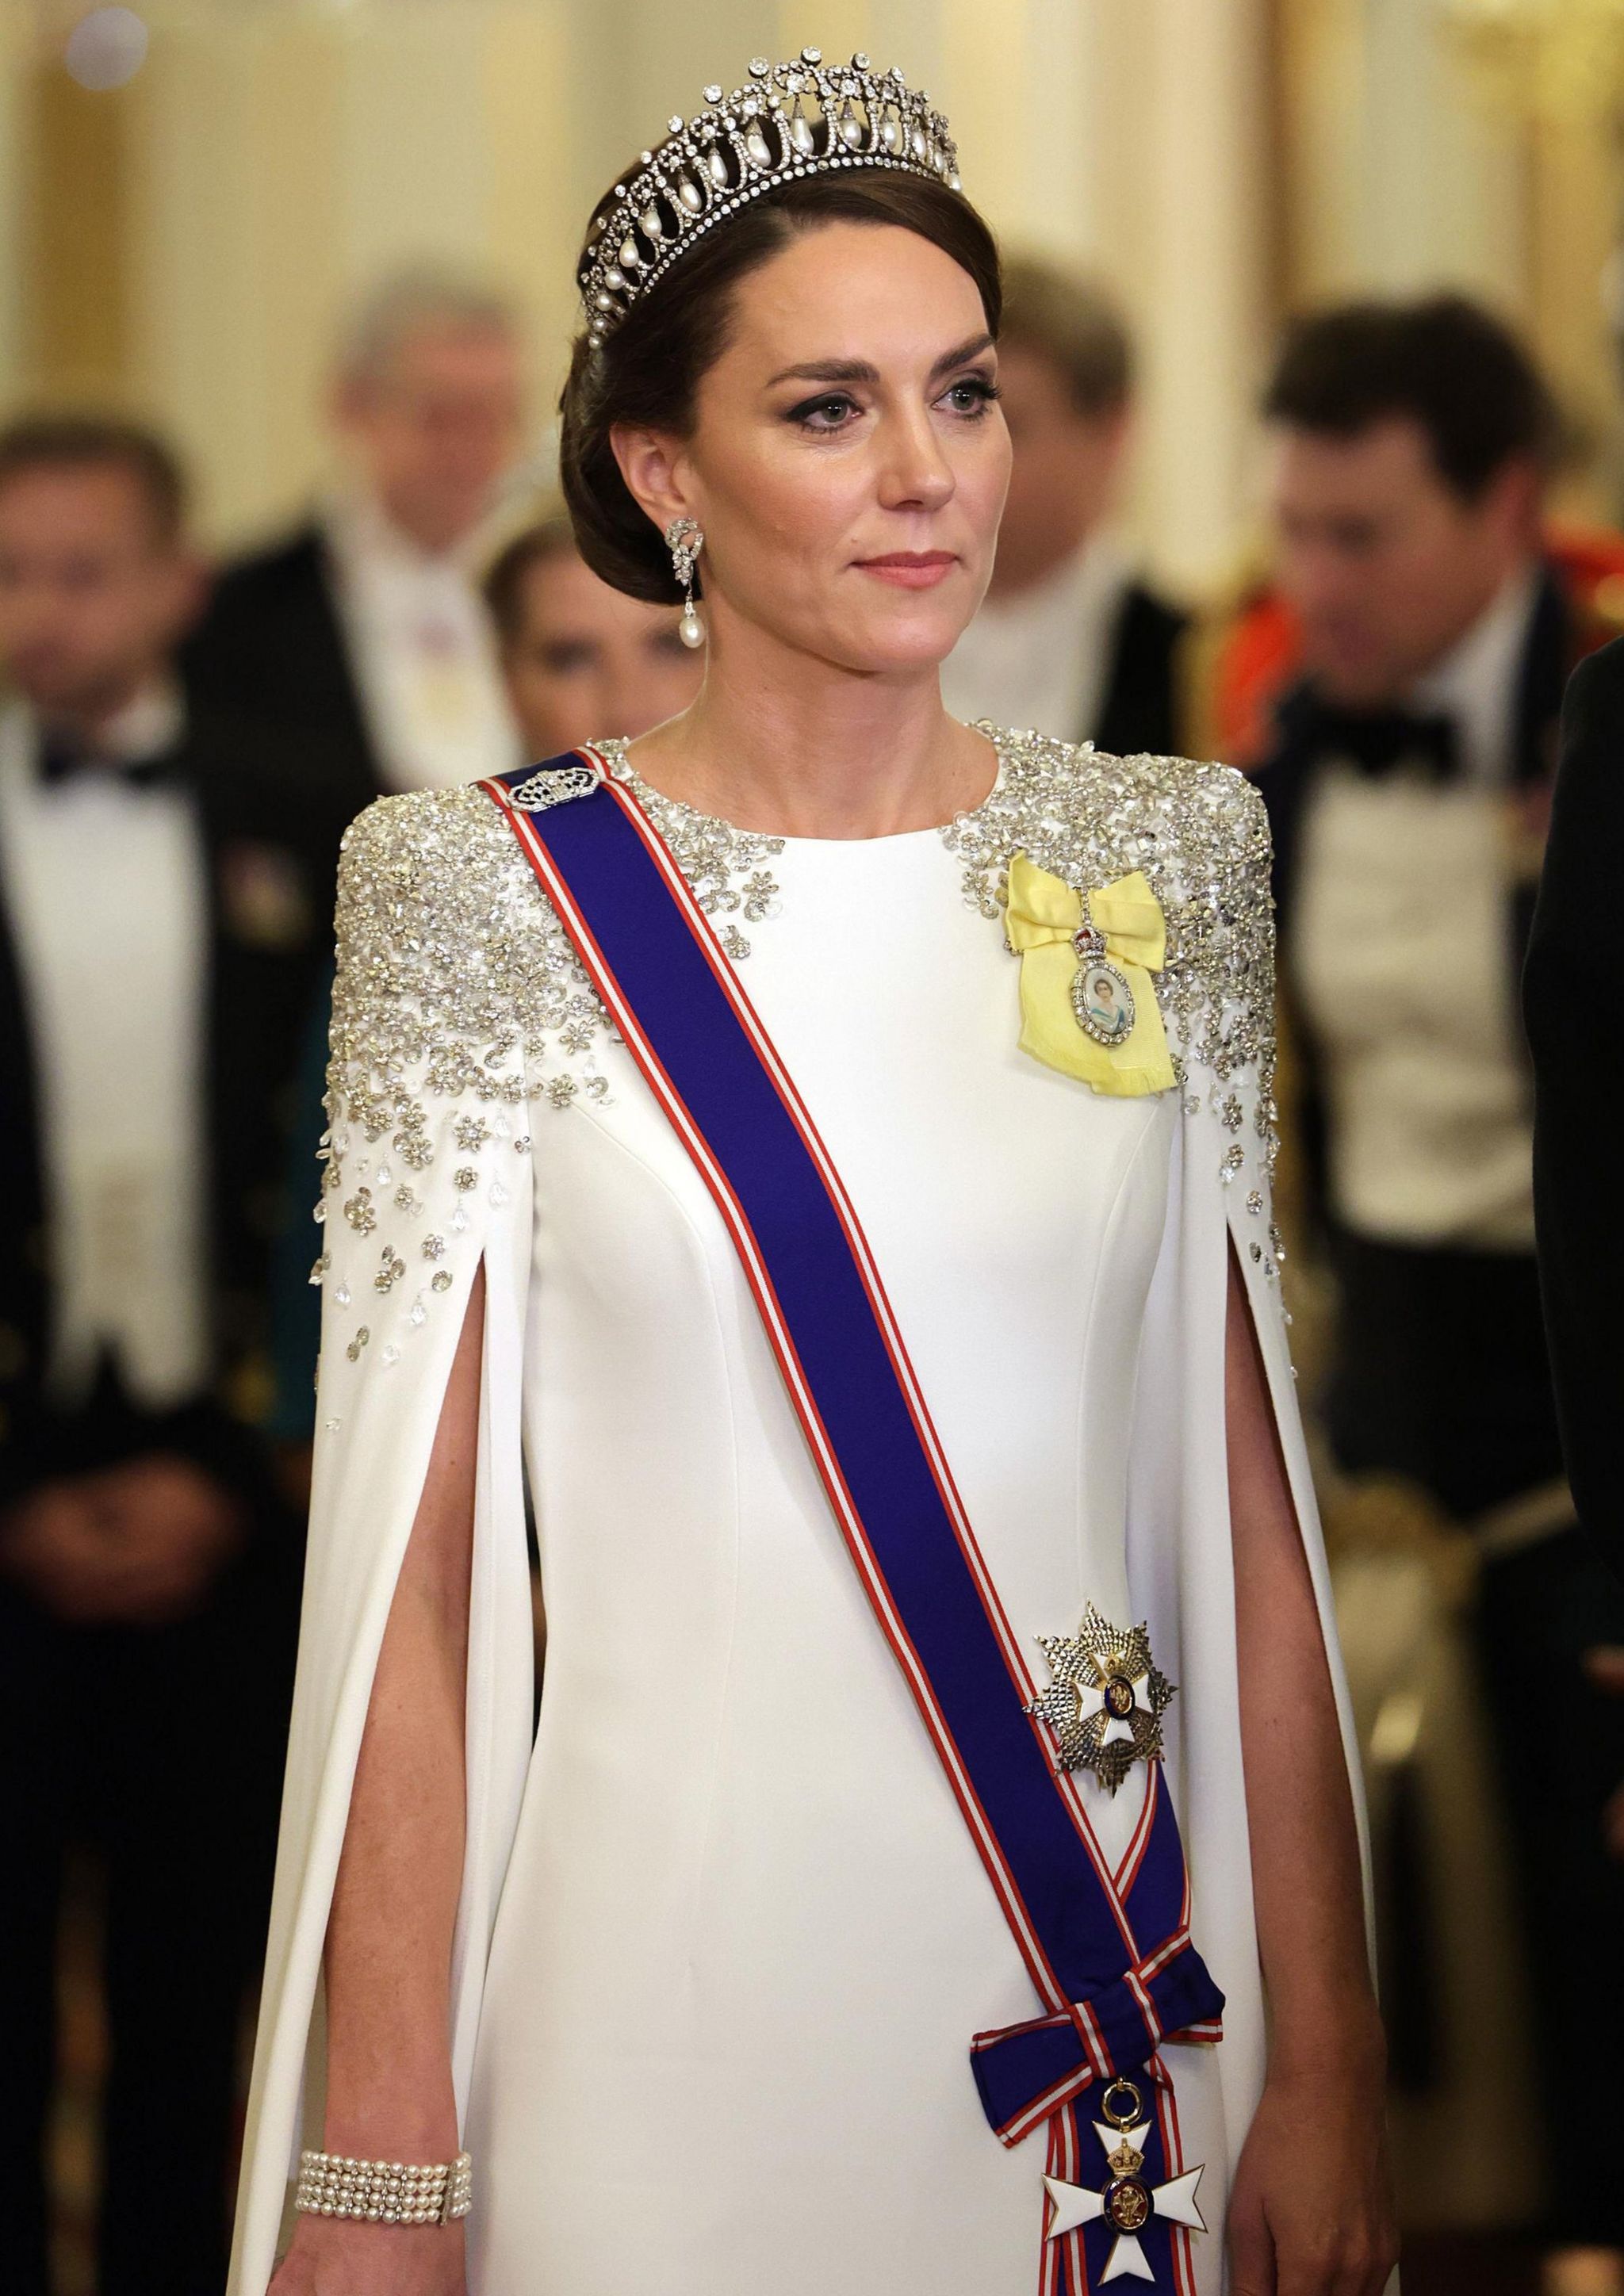 The Princess of Wales during the State Banquet at Buckingham Palace in London